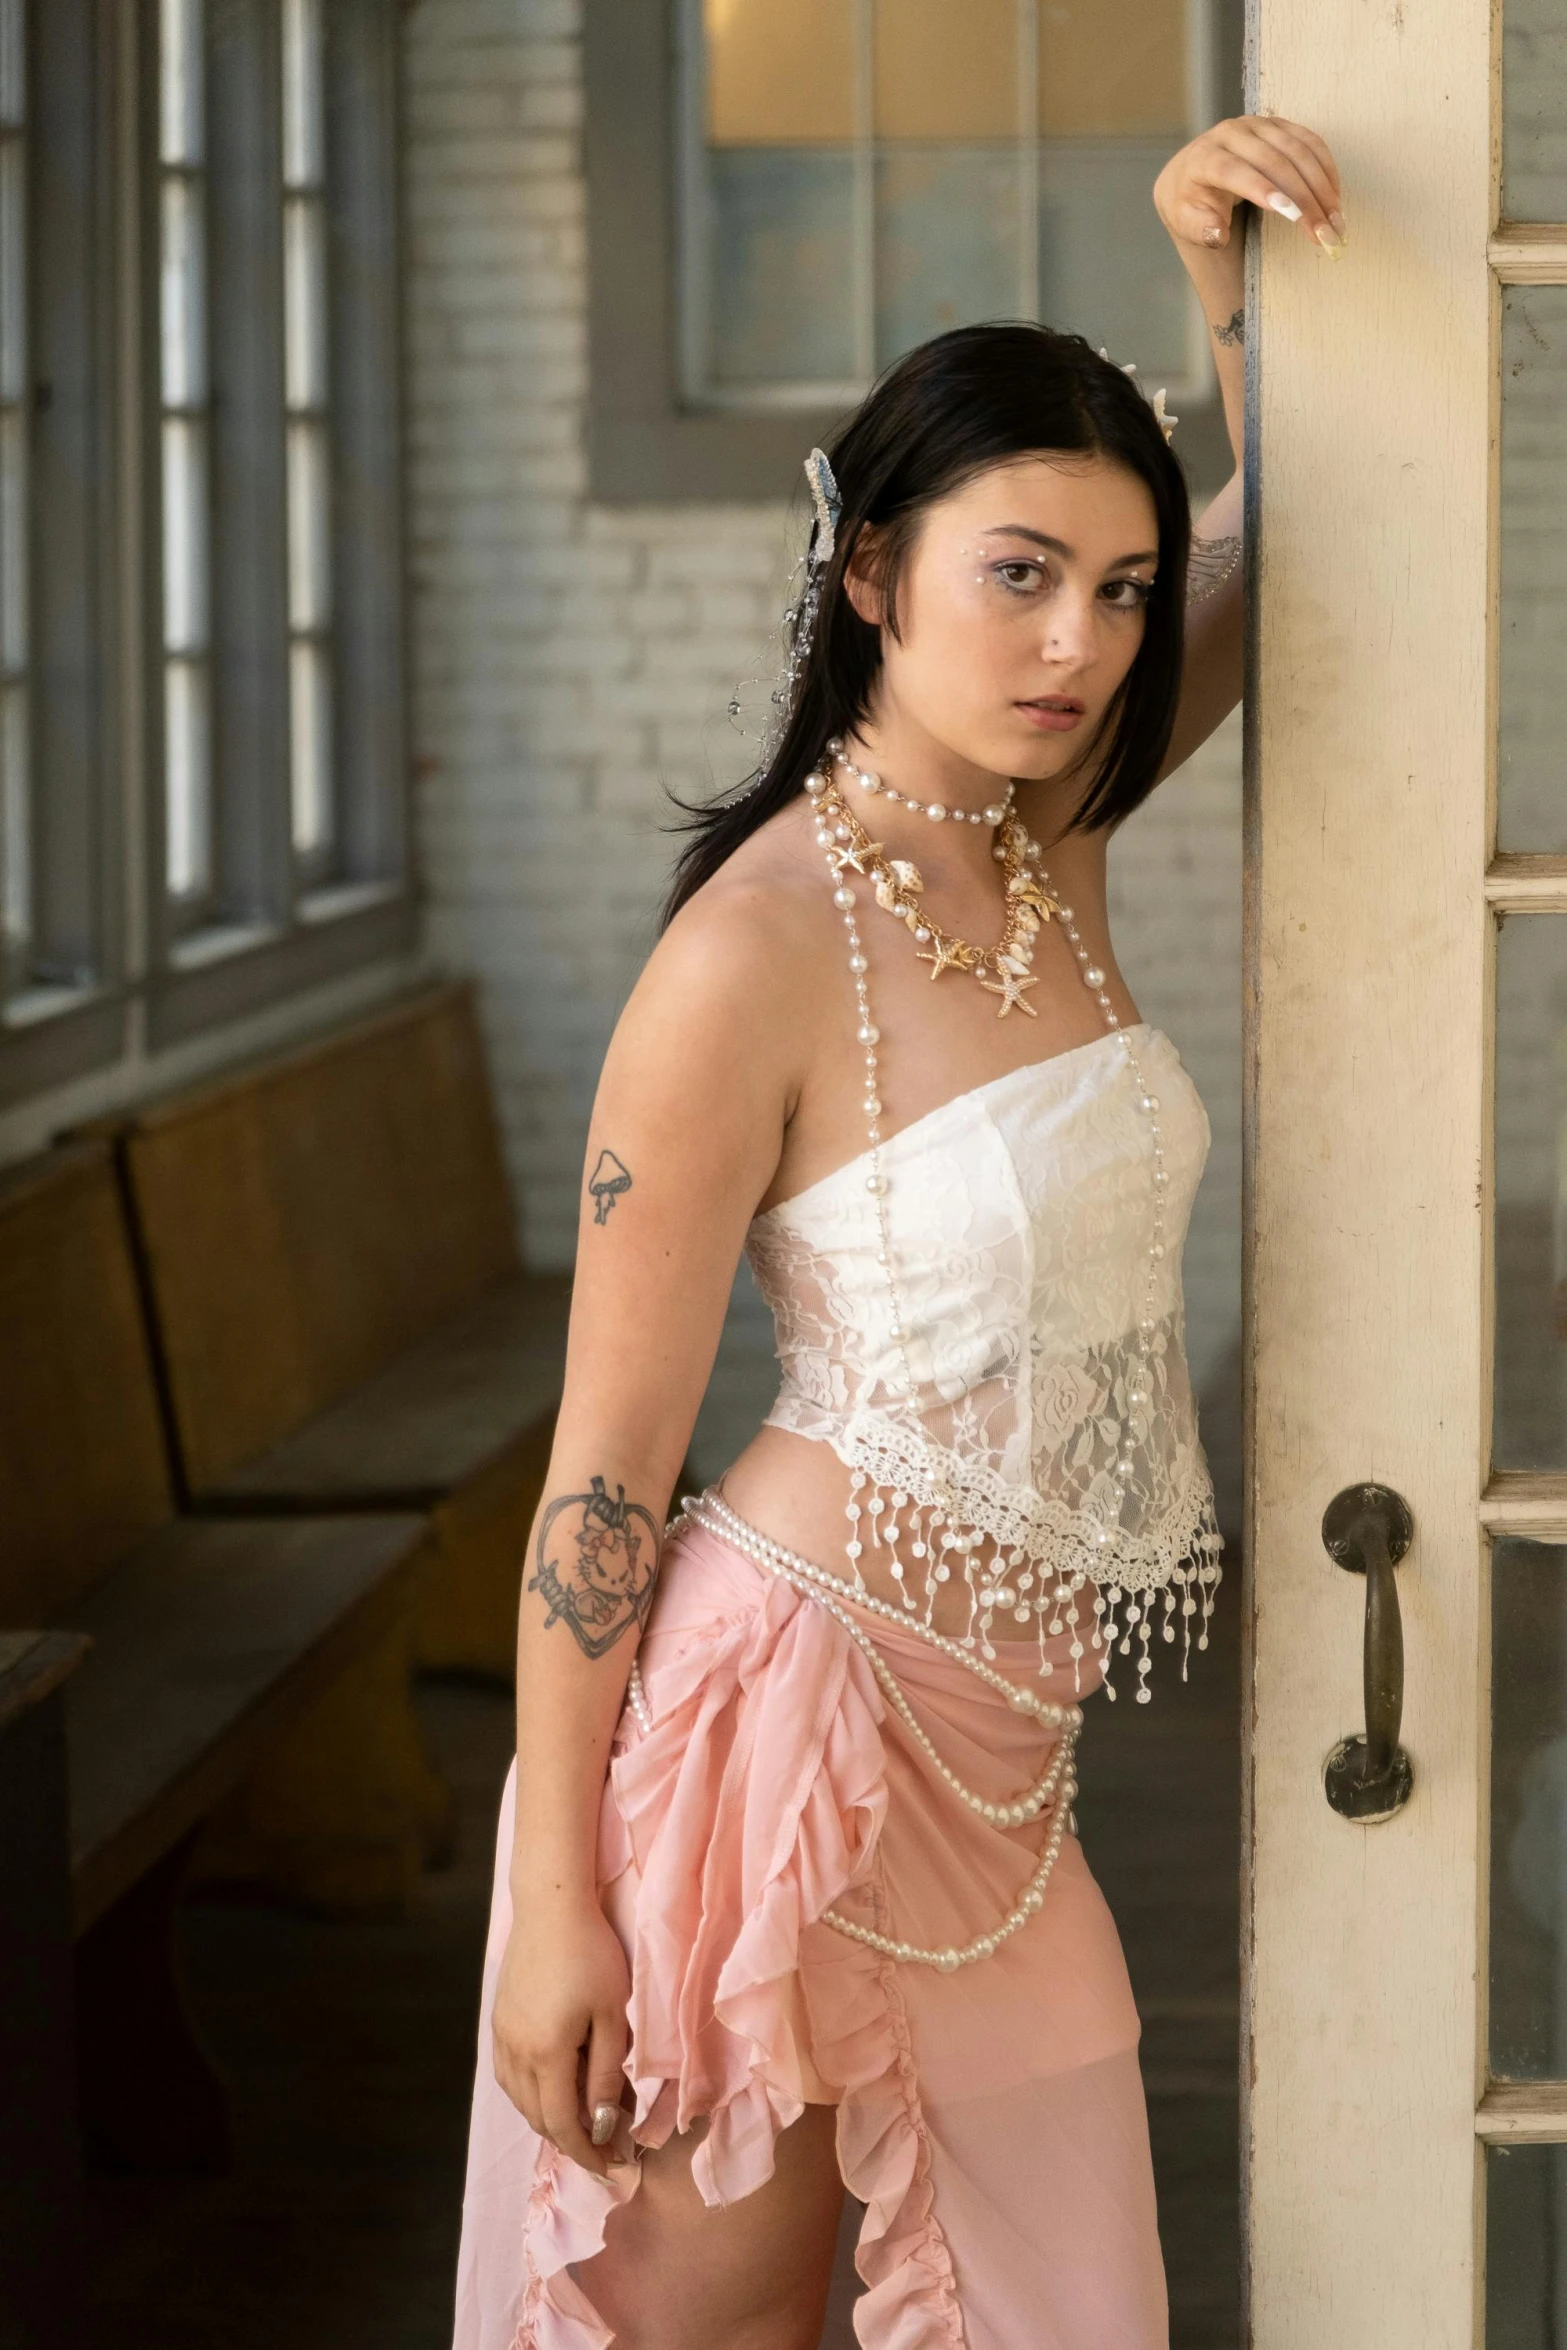 woman in white corset and pink dress posing with pearls